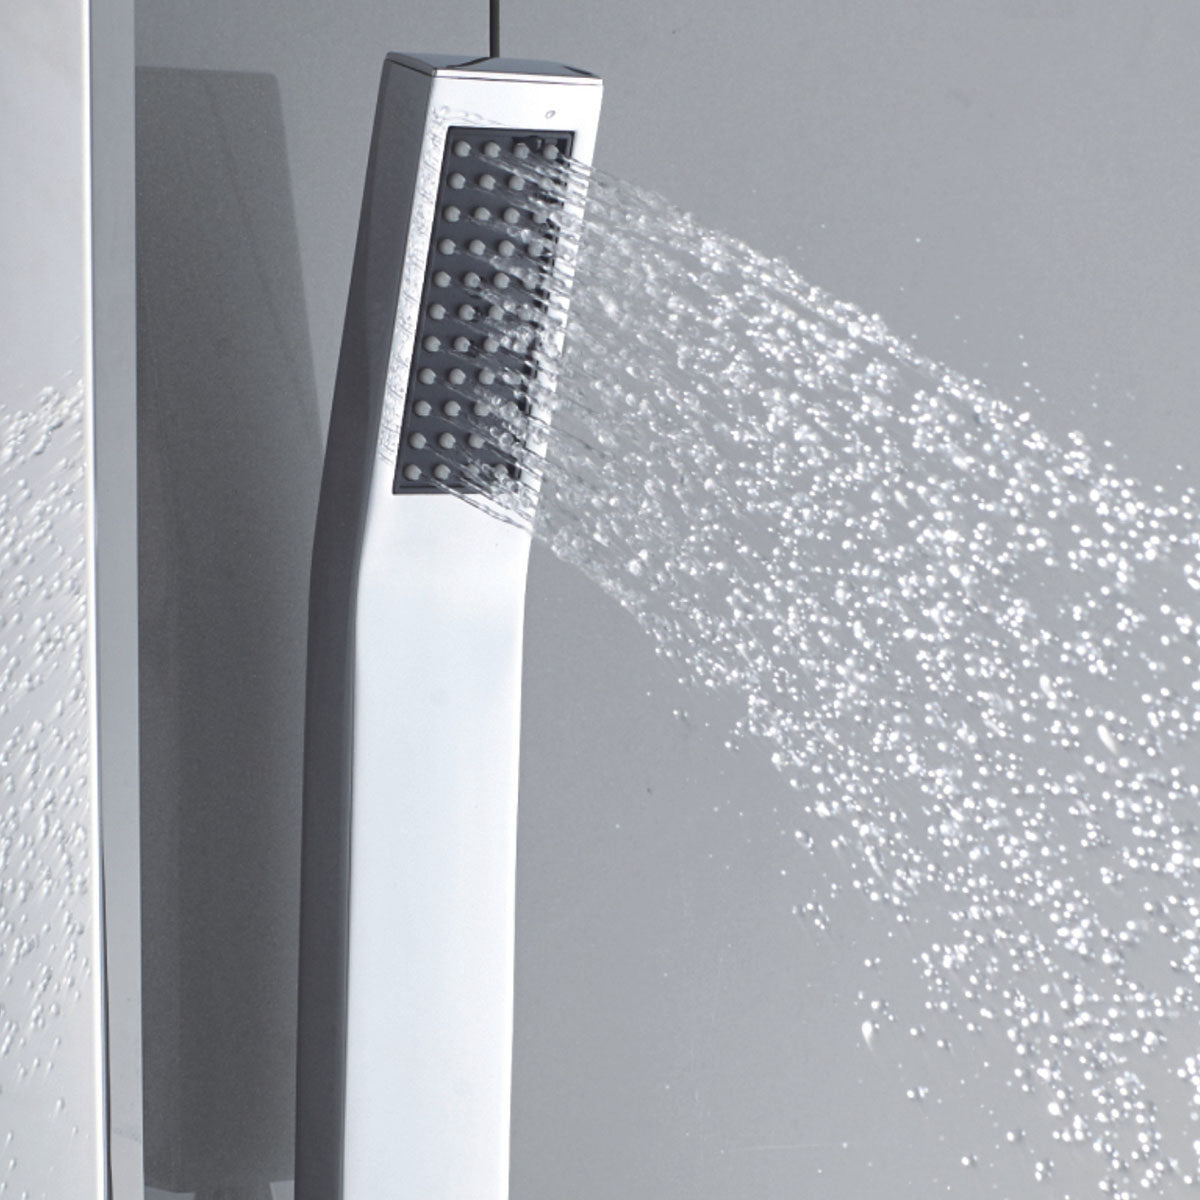 SP-1688 Stainless Steel Shower Panel (Chrome) - iStyle Bath